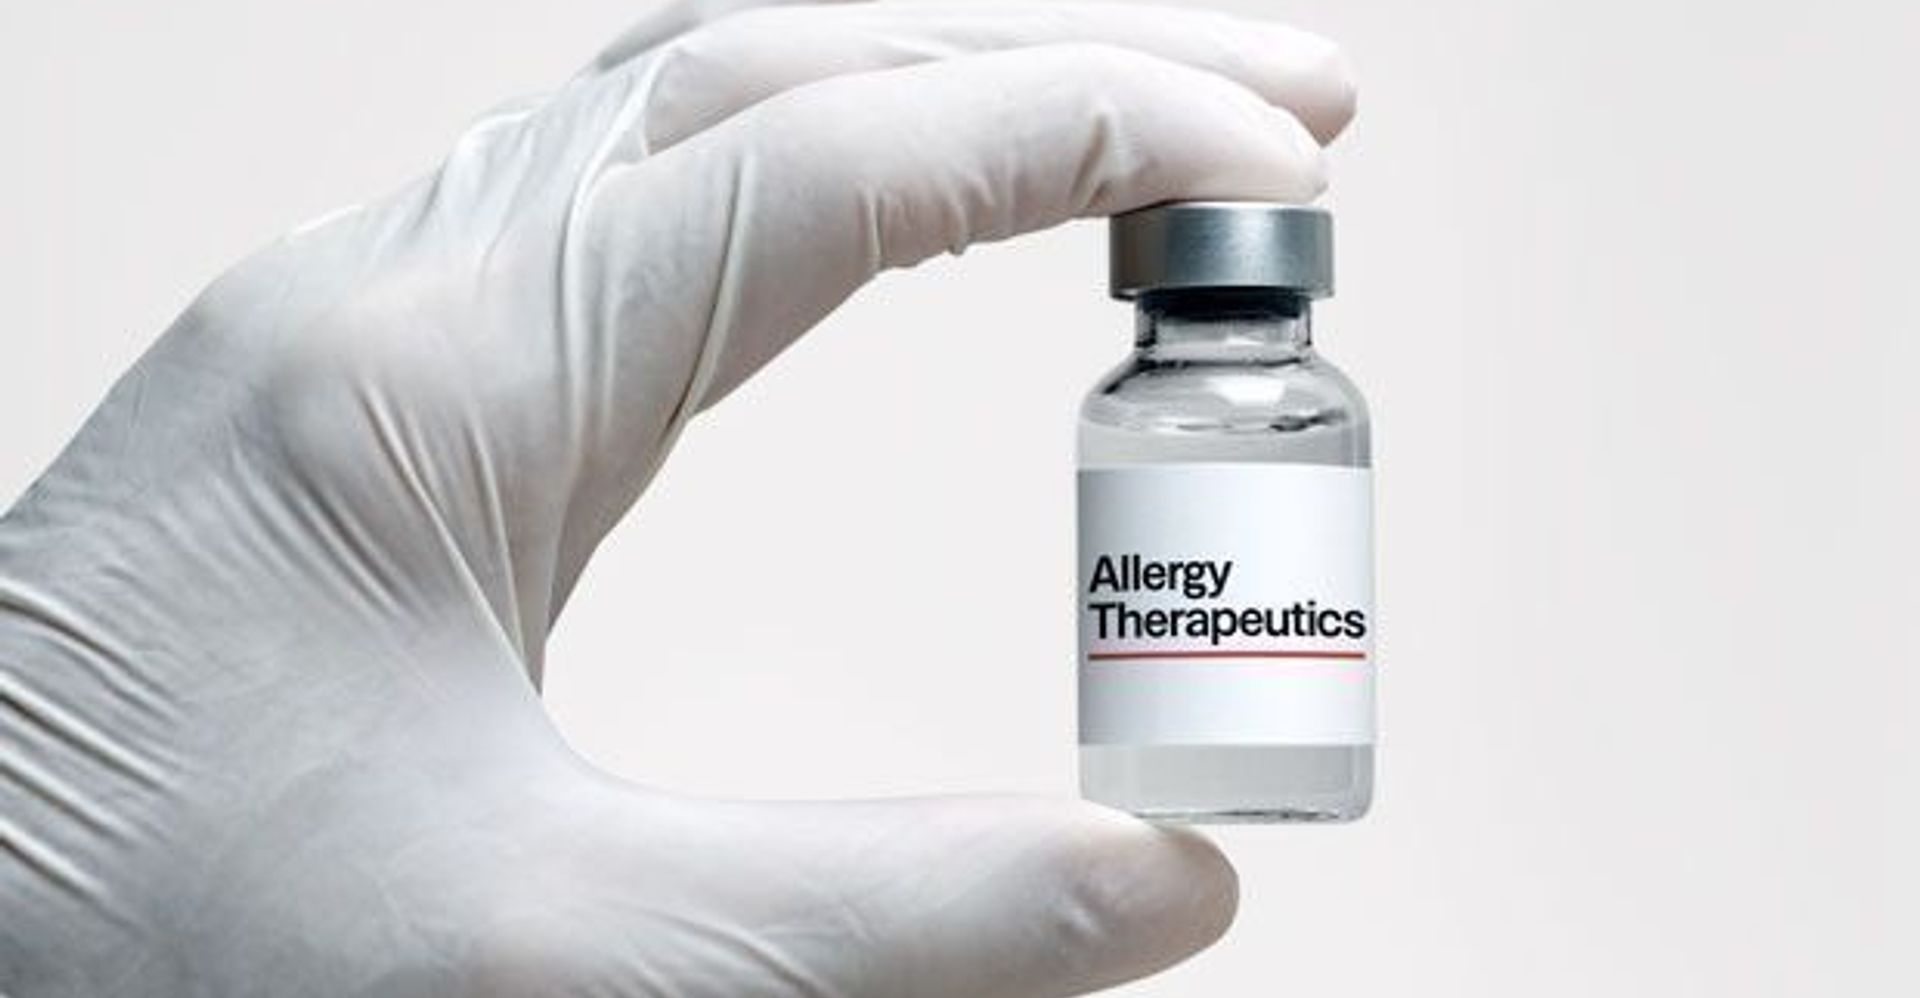 Allergy Therapeutics, a UK-based biotechnology company specializing in allergy vaccines, announced the start of the first application of its ‘VLP Peanut’ vaccine candidate in peanut-allergic patients.